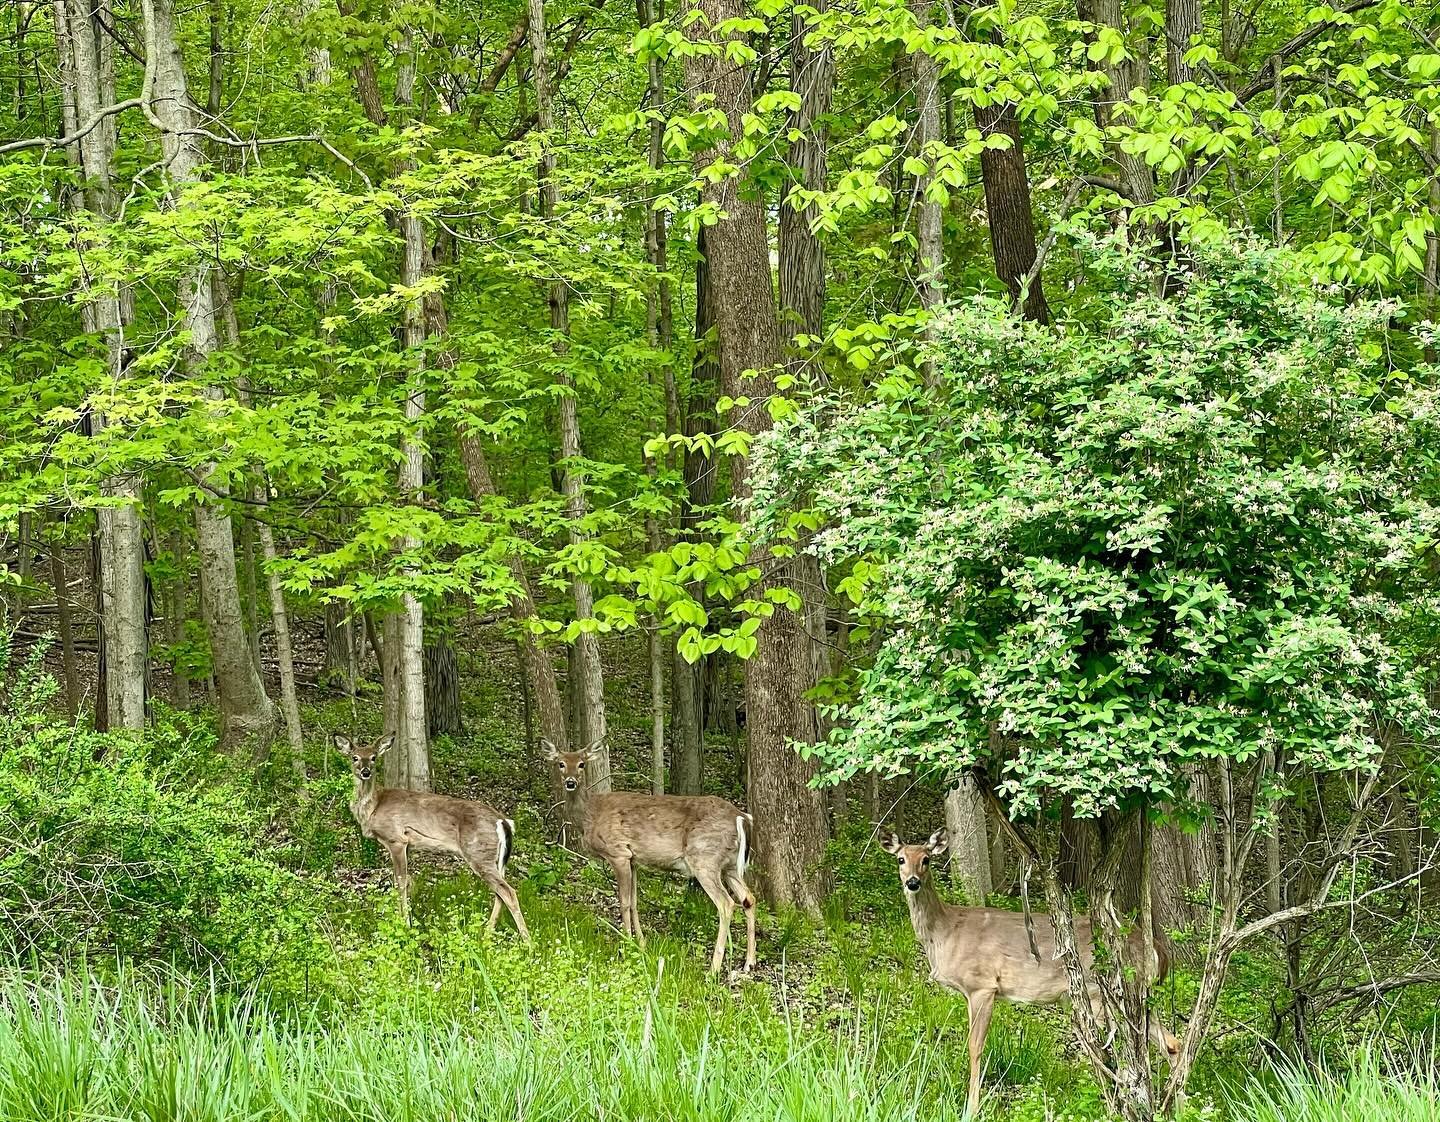 We deer-ly love how lush and green the Ports of Discovery are right now. Nature is just a step away in Marquette and McGregor! 🦌

#mcgregoriowa #portsofdiscovery #thisisiowa #green #springtime #lushandgreen #wildlife #deer